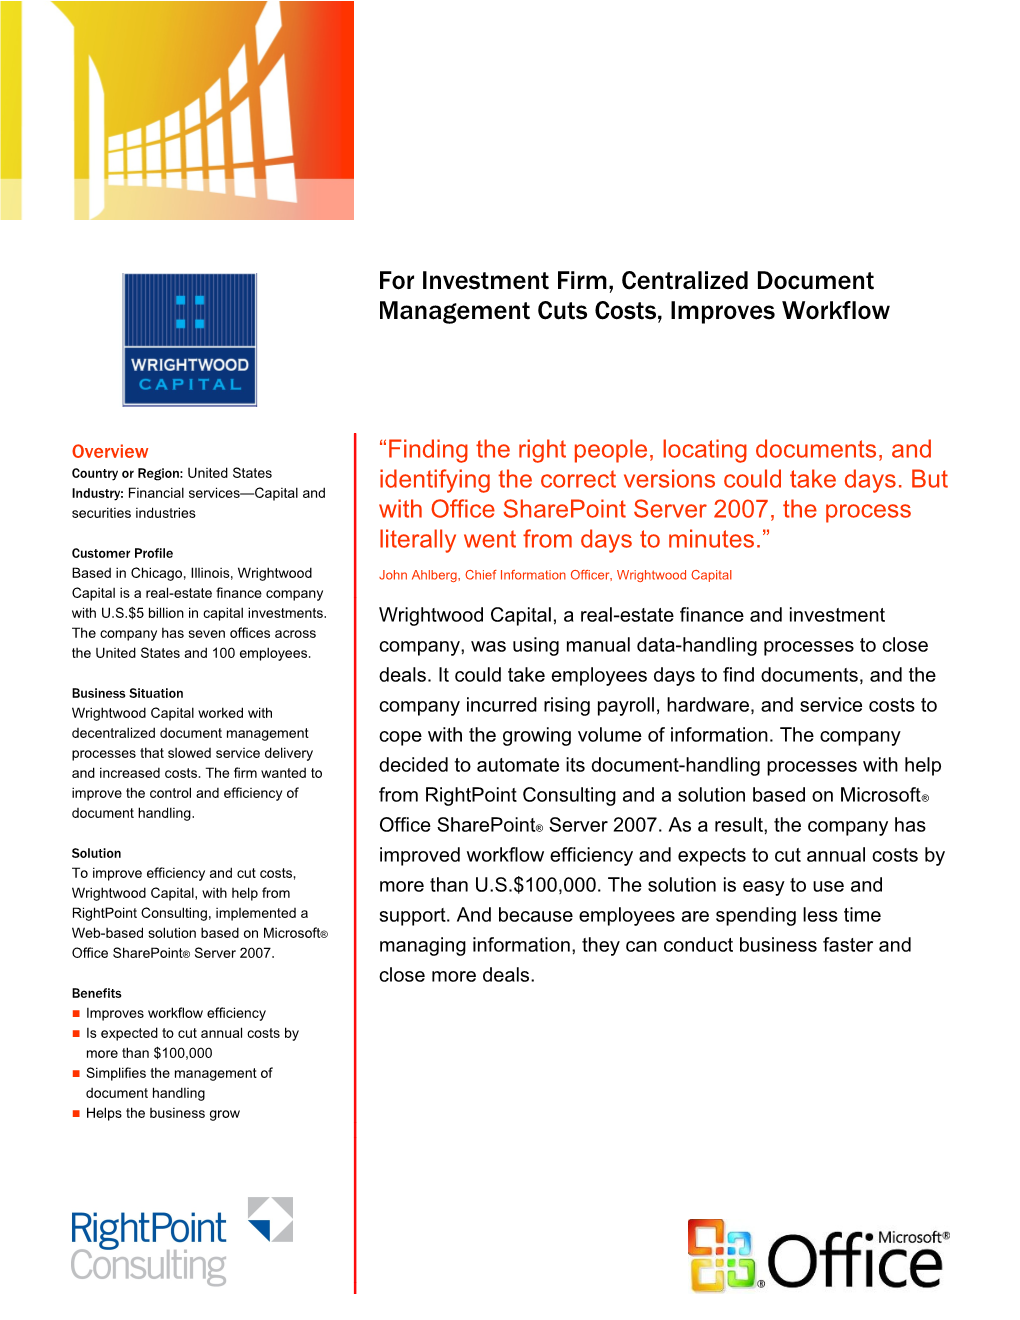 For Investment Firm, Centralized Document Management Cuts Costs, Improves Workflow